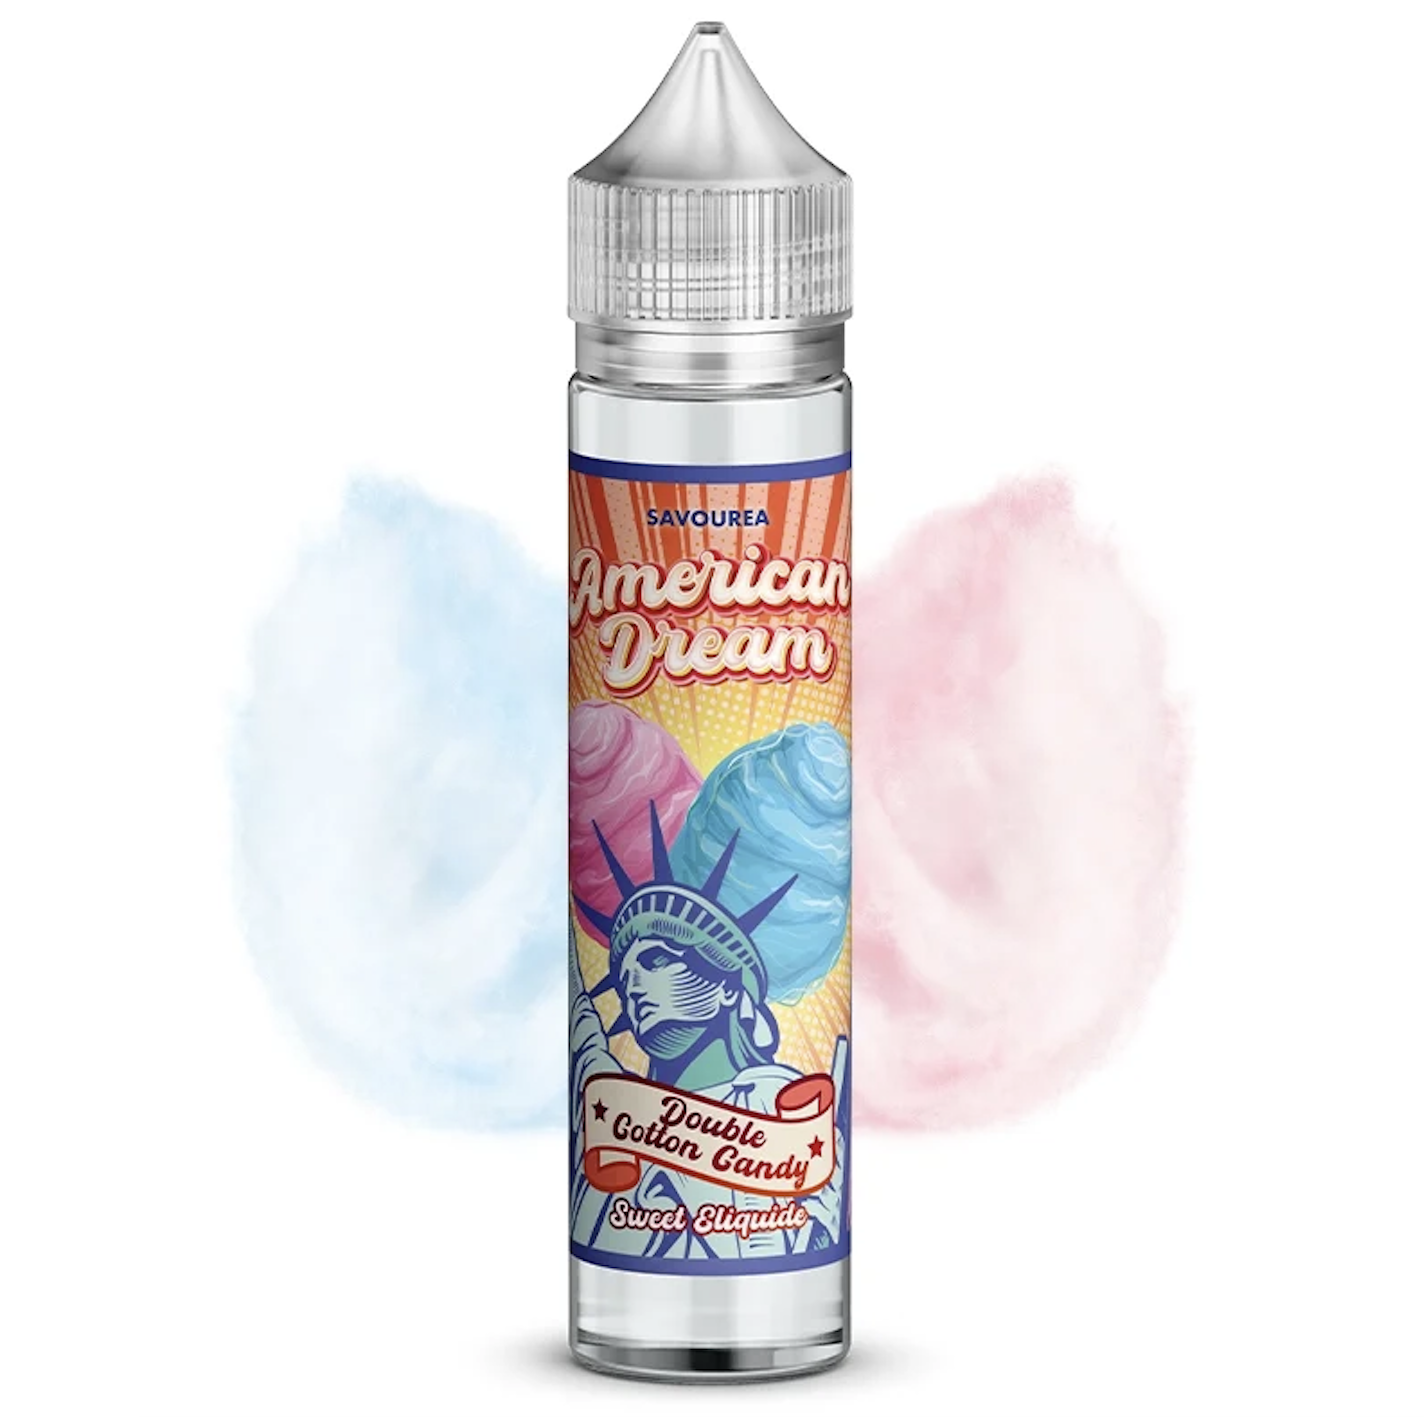 Double Cotton Candy - American Dream - 50 ml